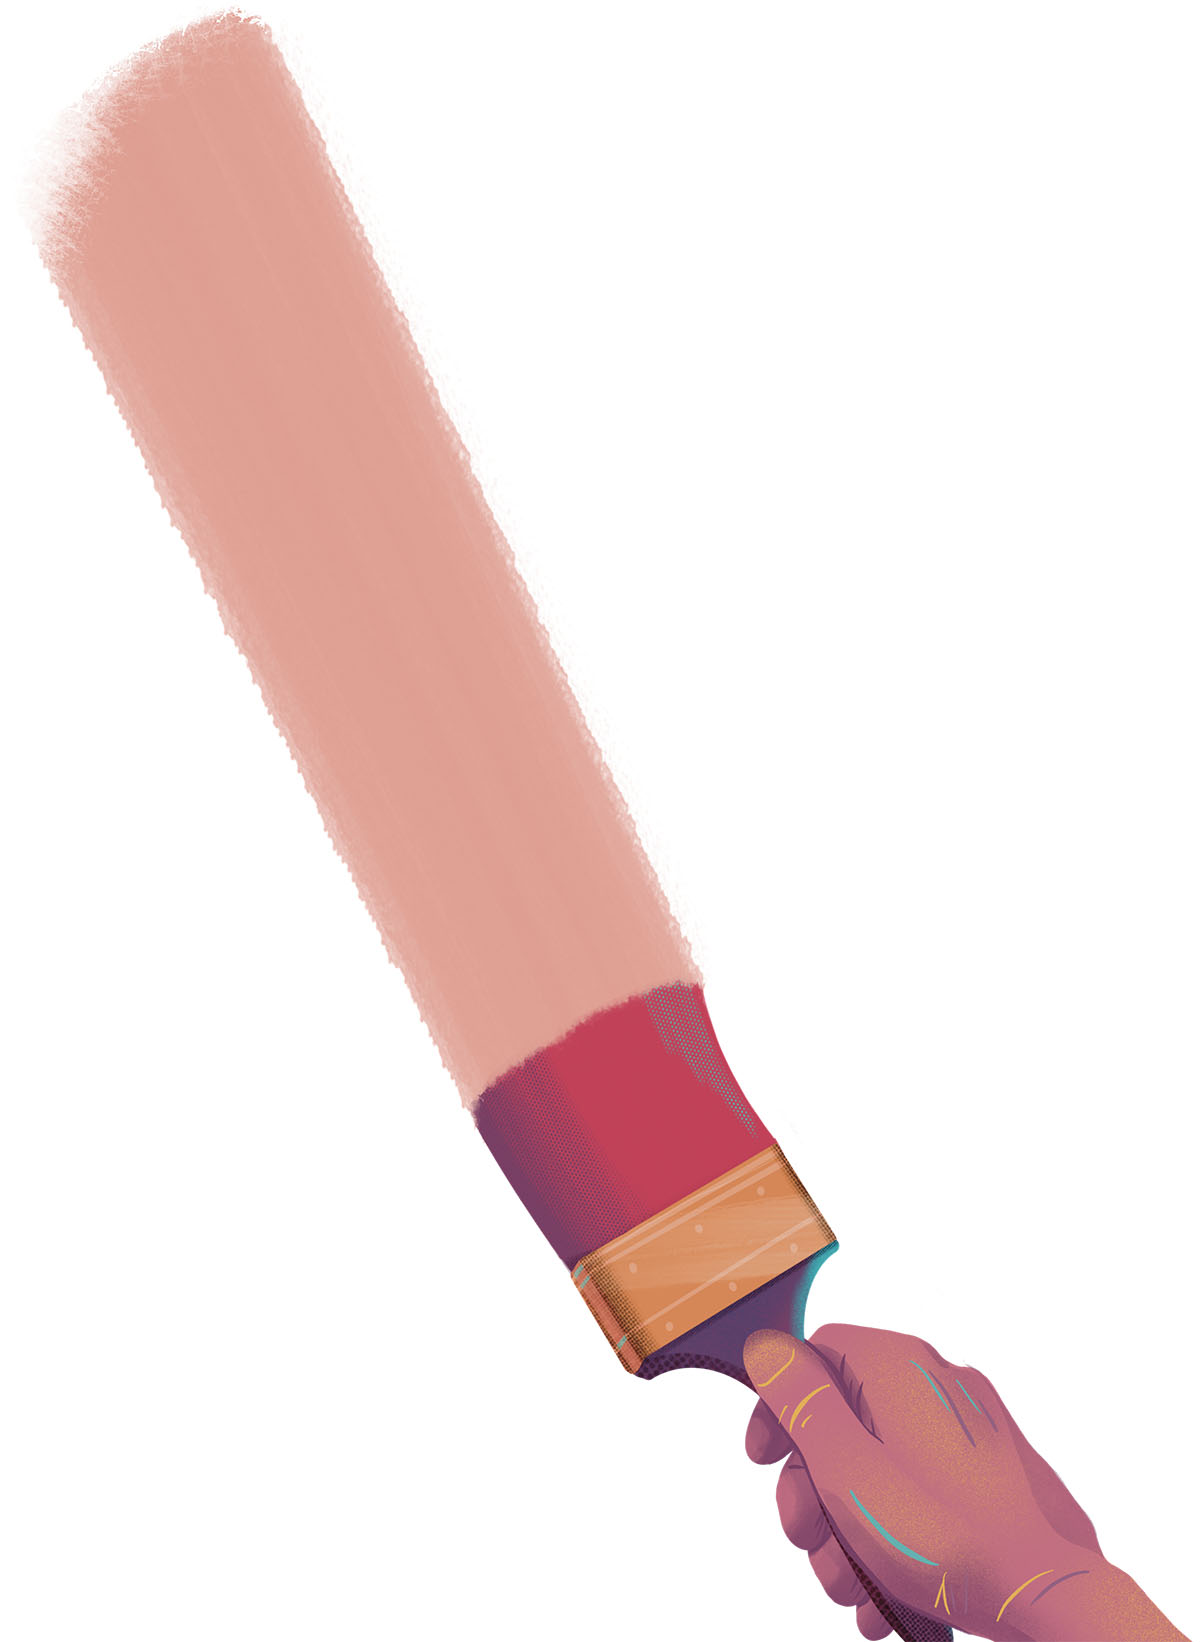 An illustratotion of a hand holding a paintbrush having painted a line.